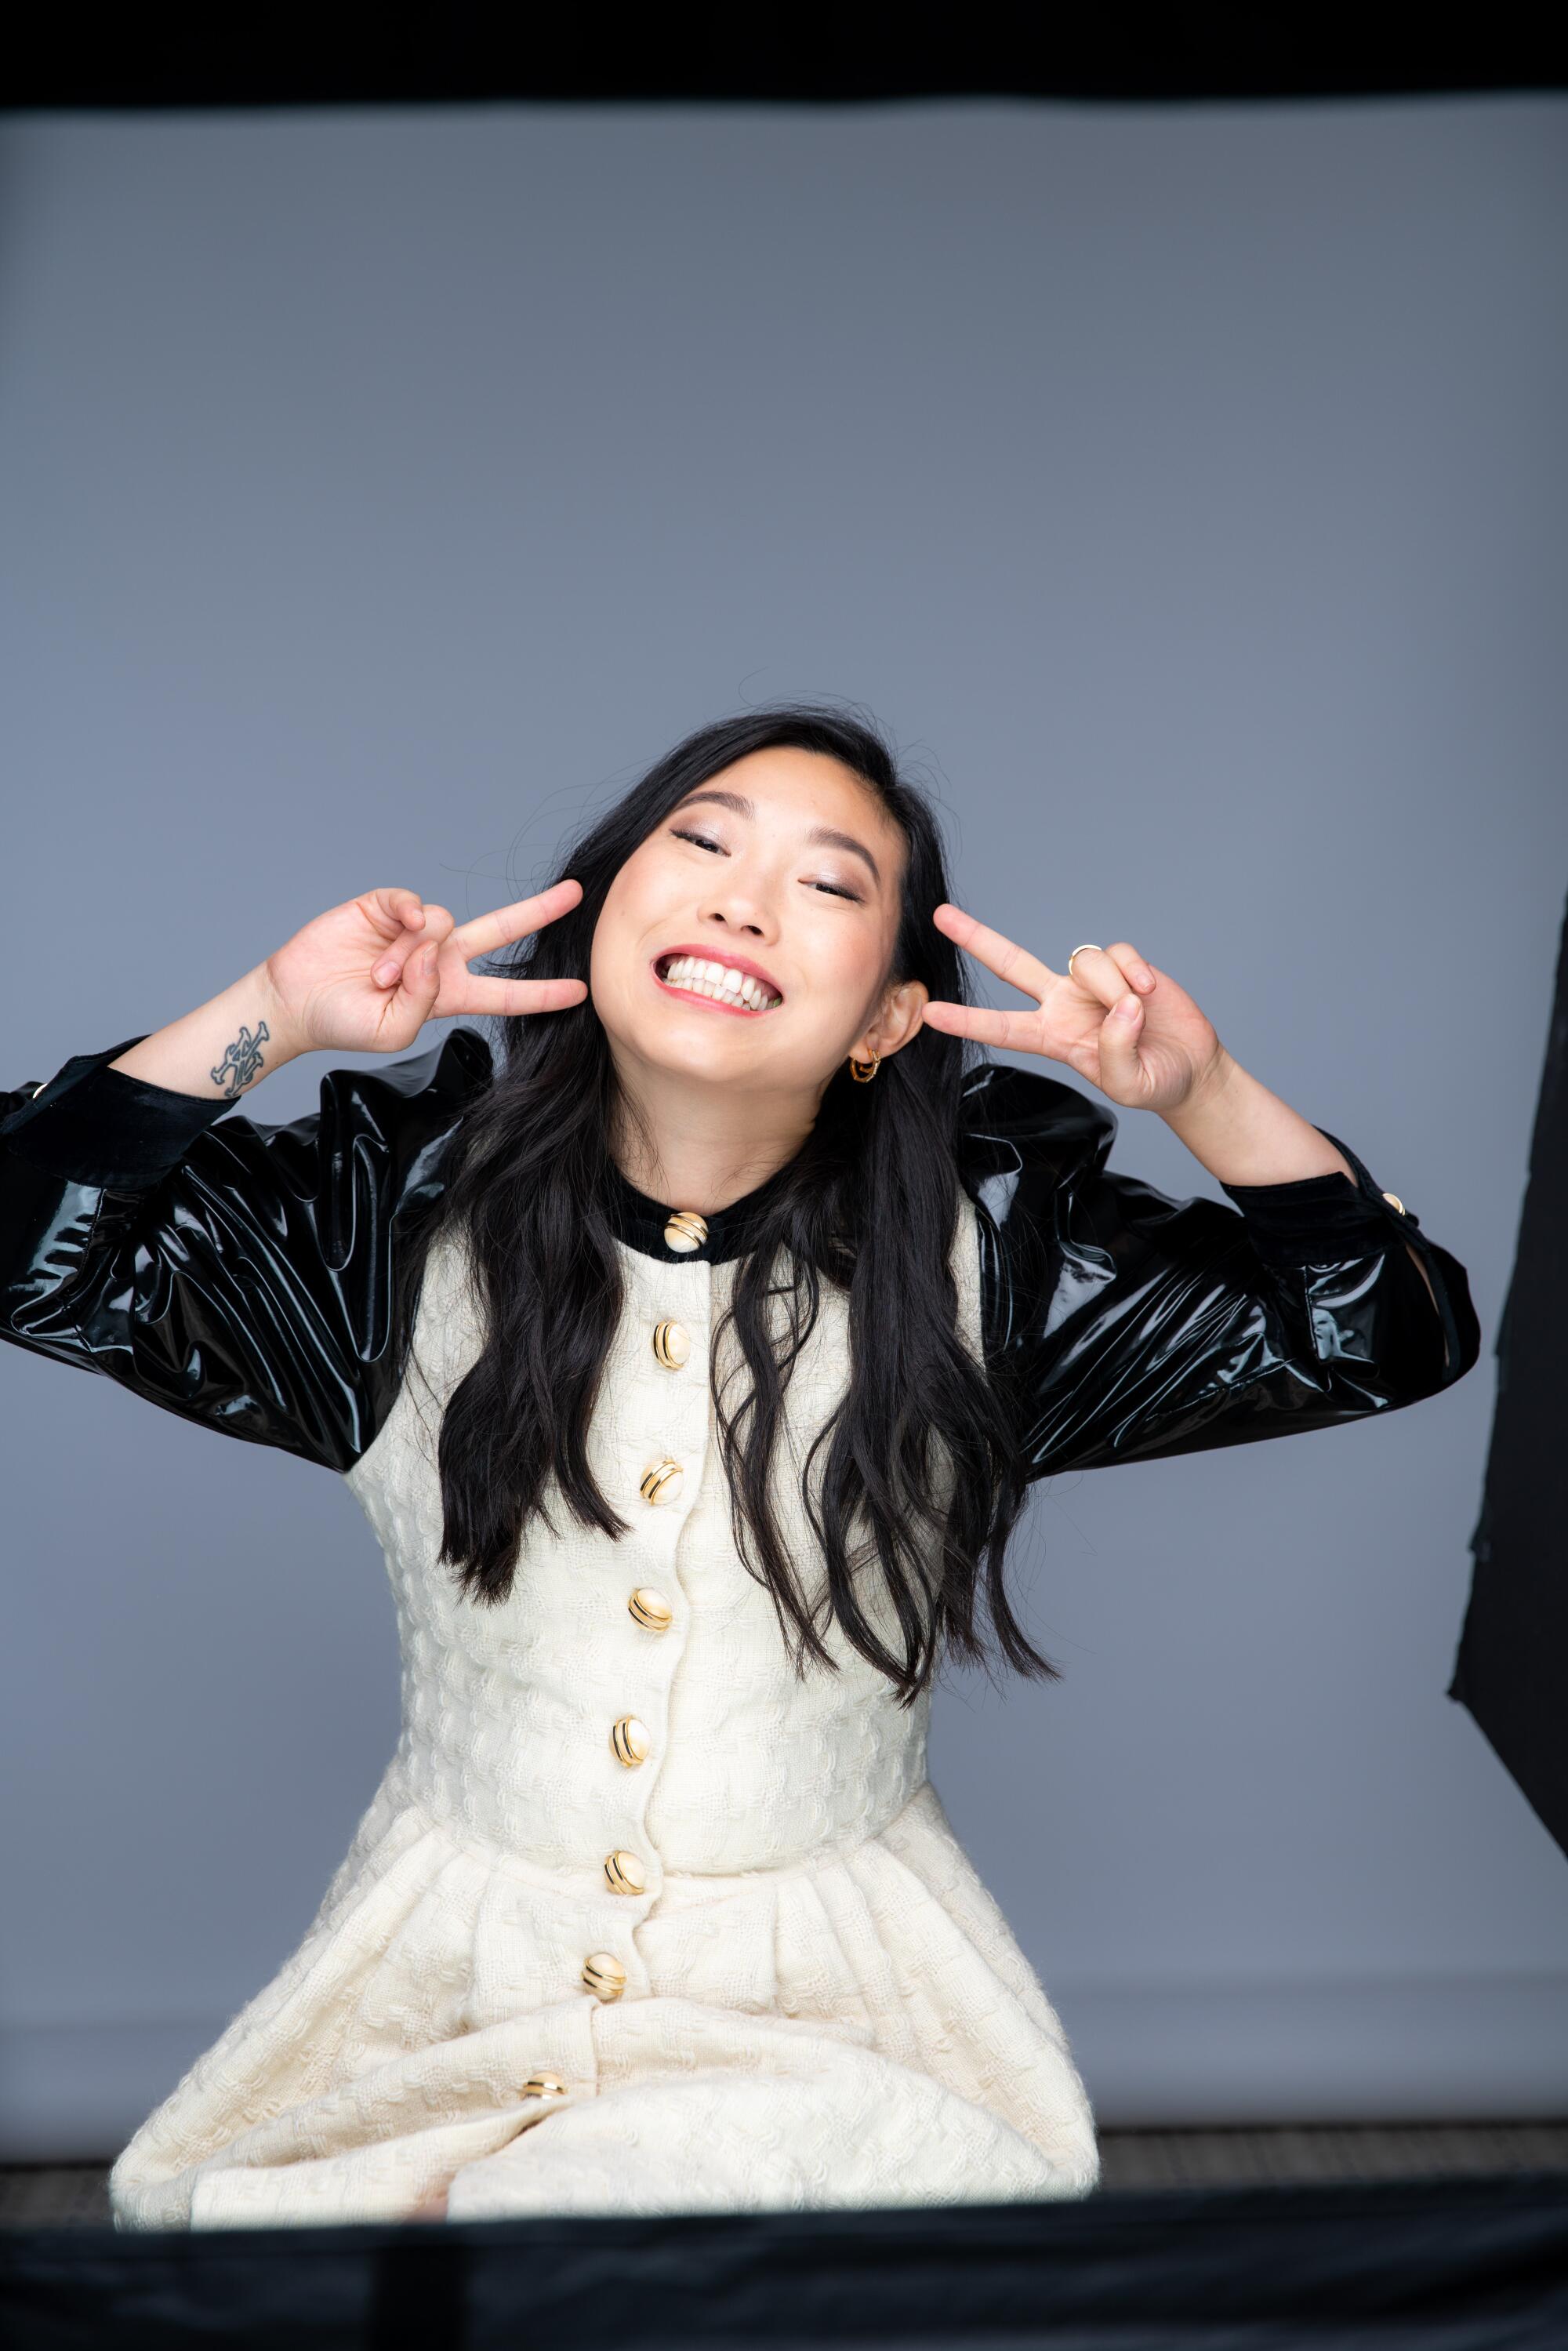 Actor, comedian and rapper Awkwafina